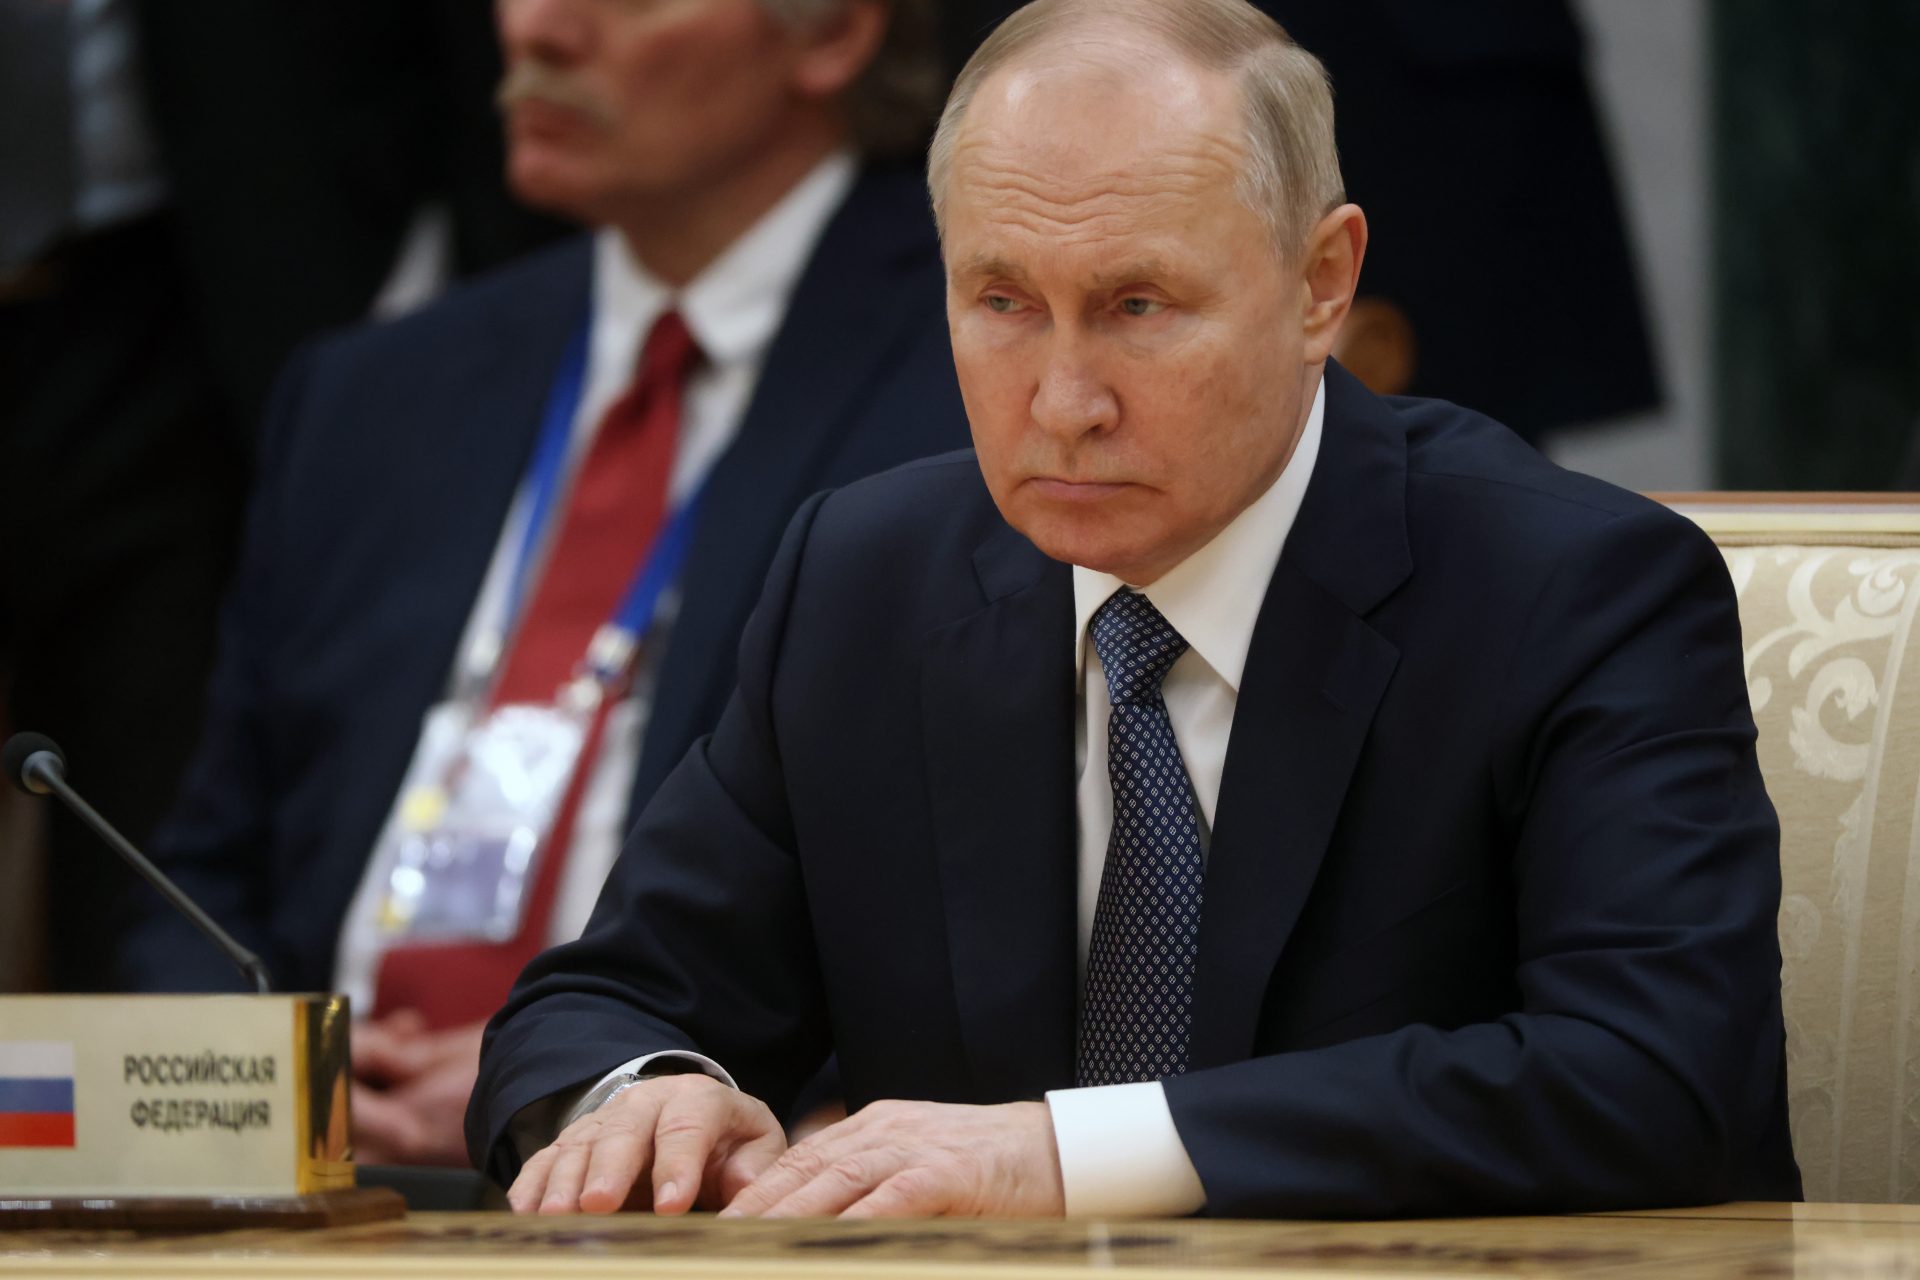 Putin could be on a collision course with one of his closest allies